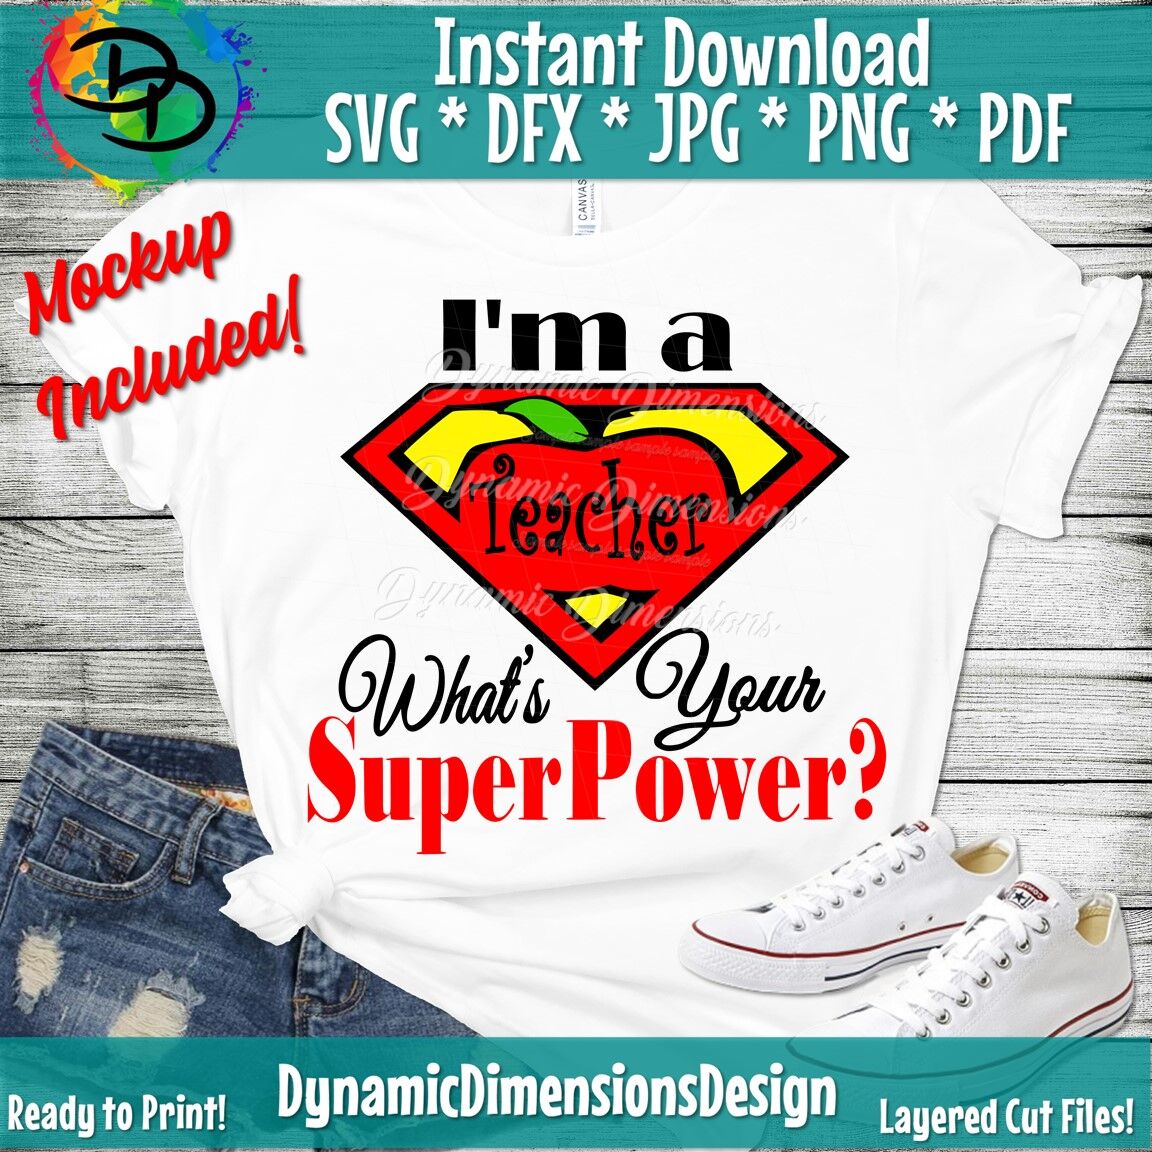 I'm a teacher what's your superpower SVG / Teacher Quote / Cut File /  clipart / printable / vector | commercial use instant download